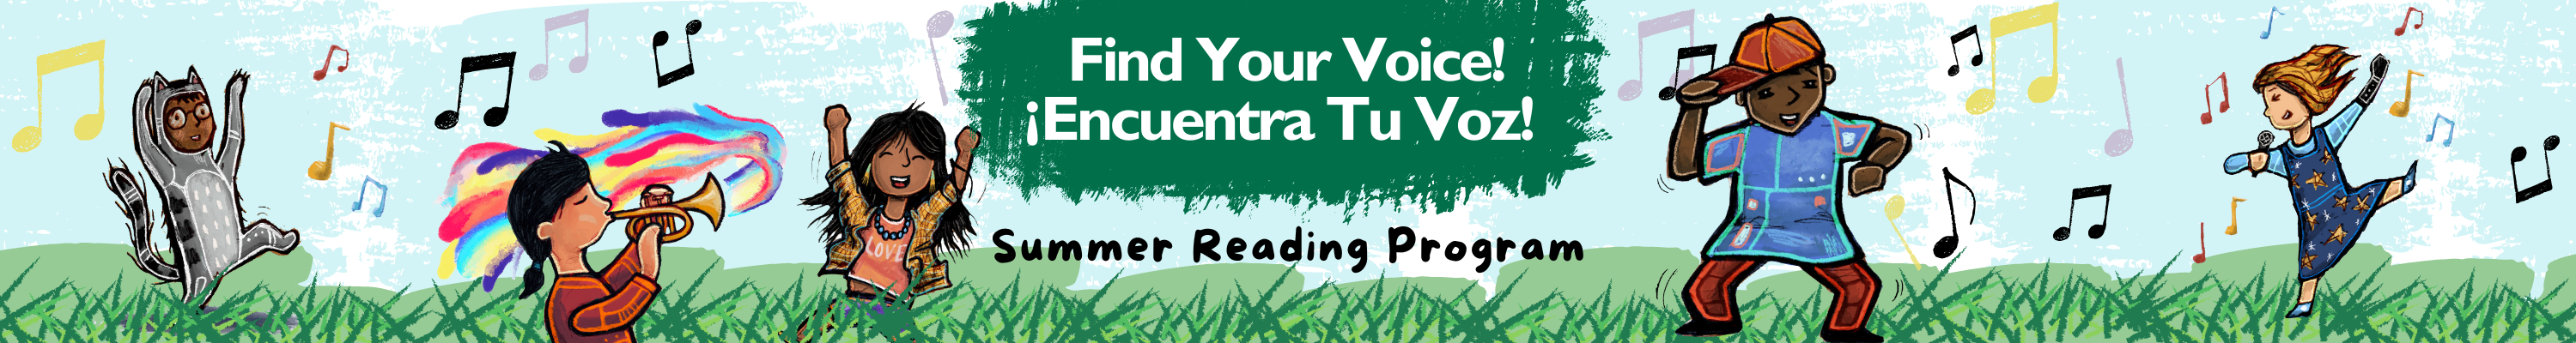 Summer Reading Program - Find Your Voice!